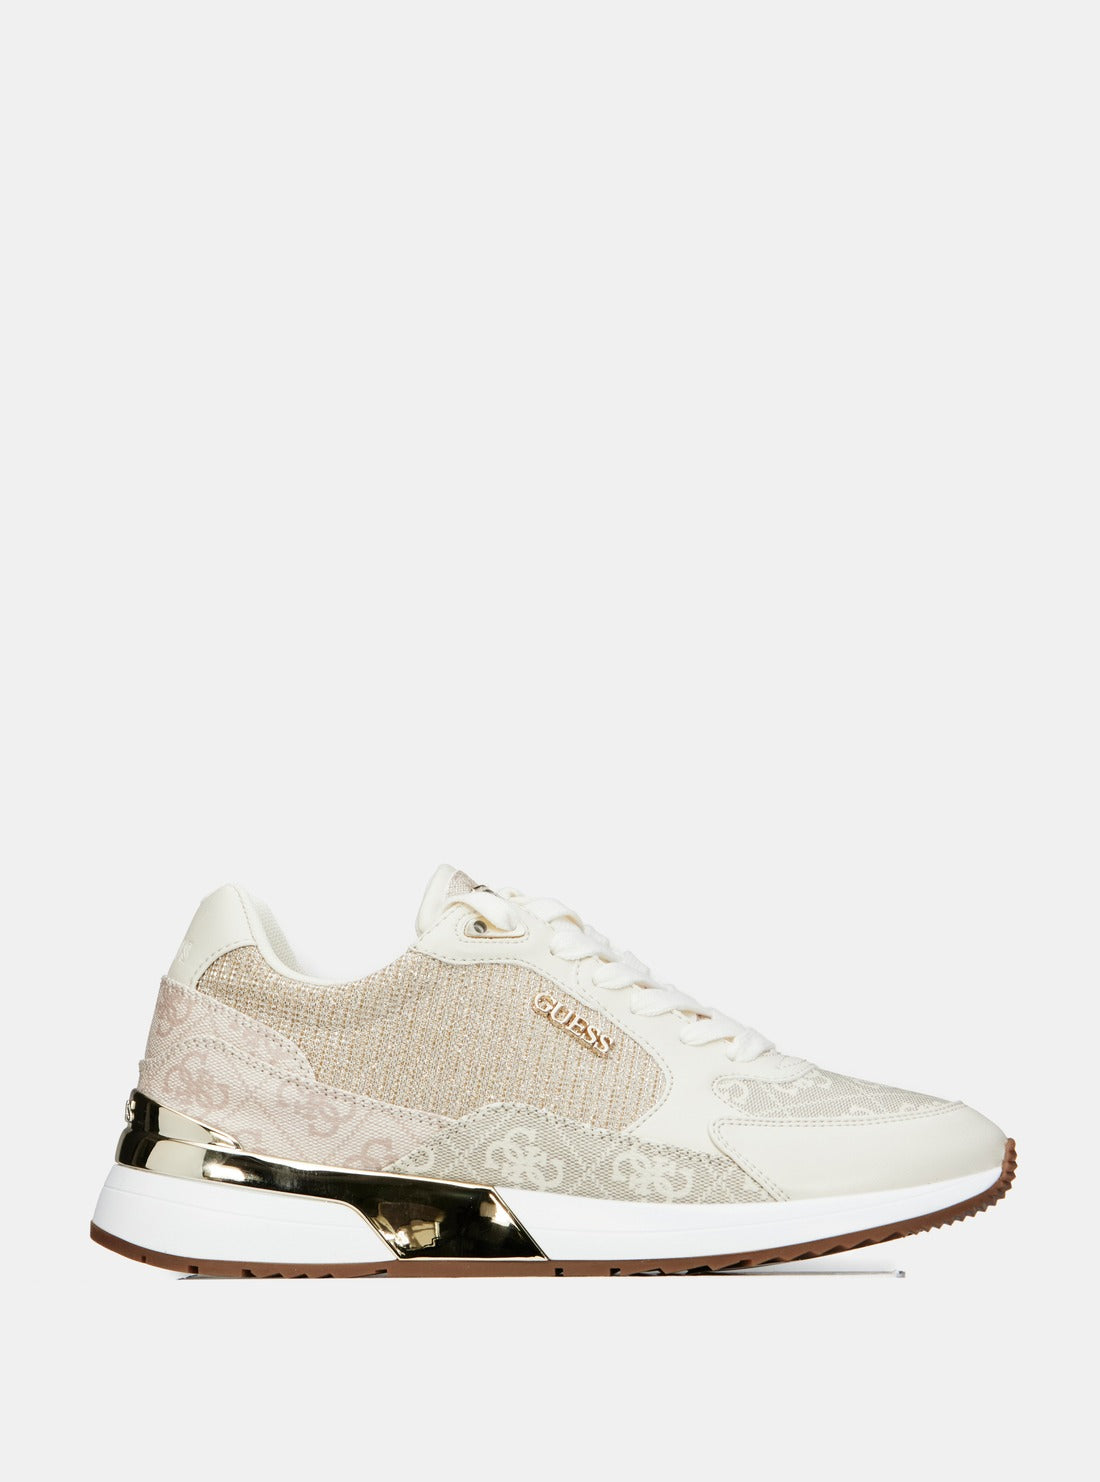 GUESS Cream Logo Low-Top Sneakers side view